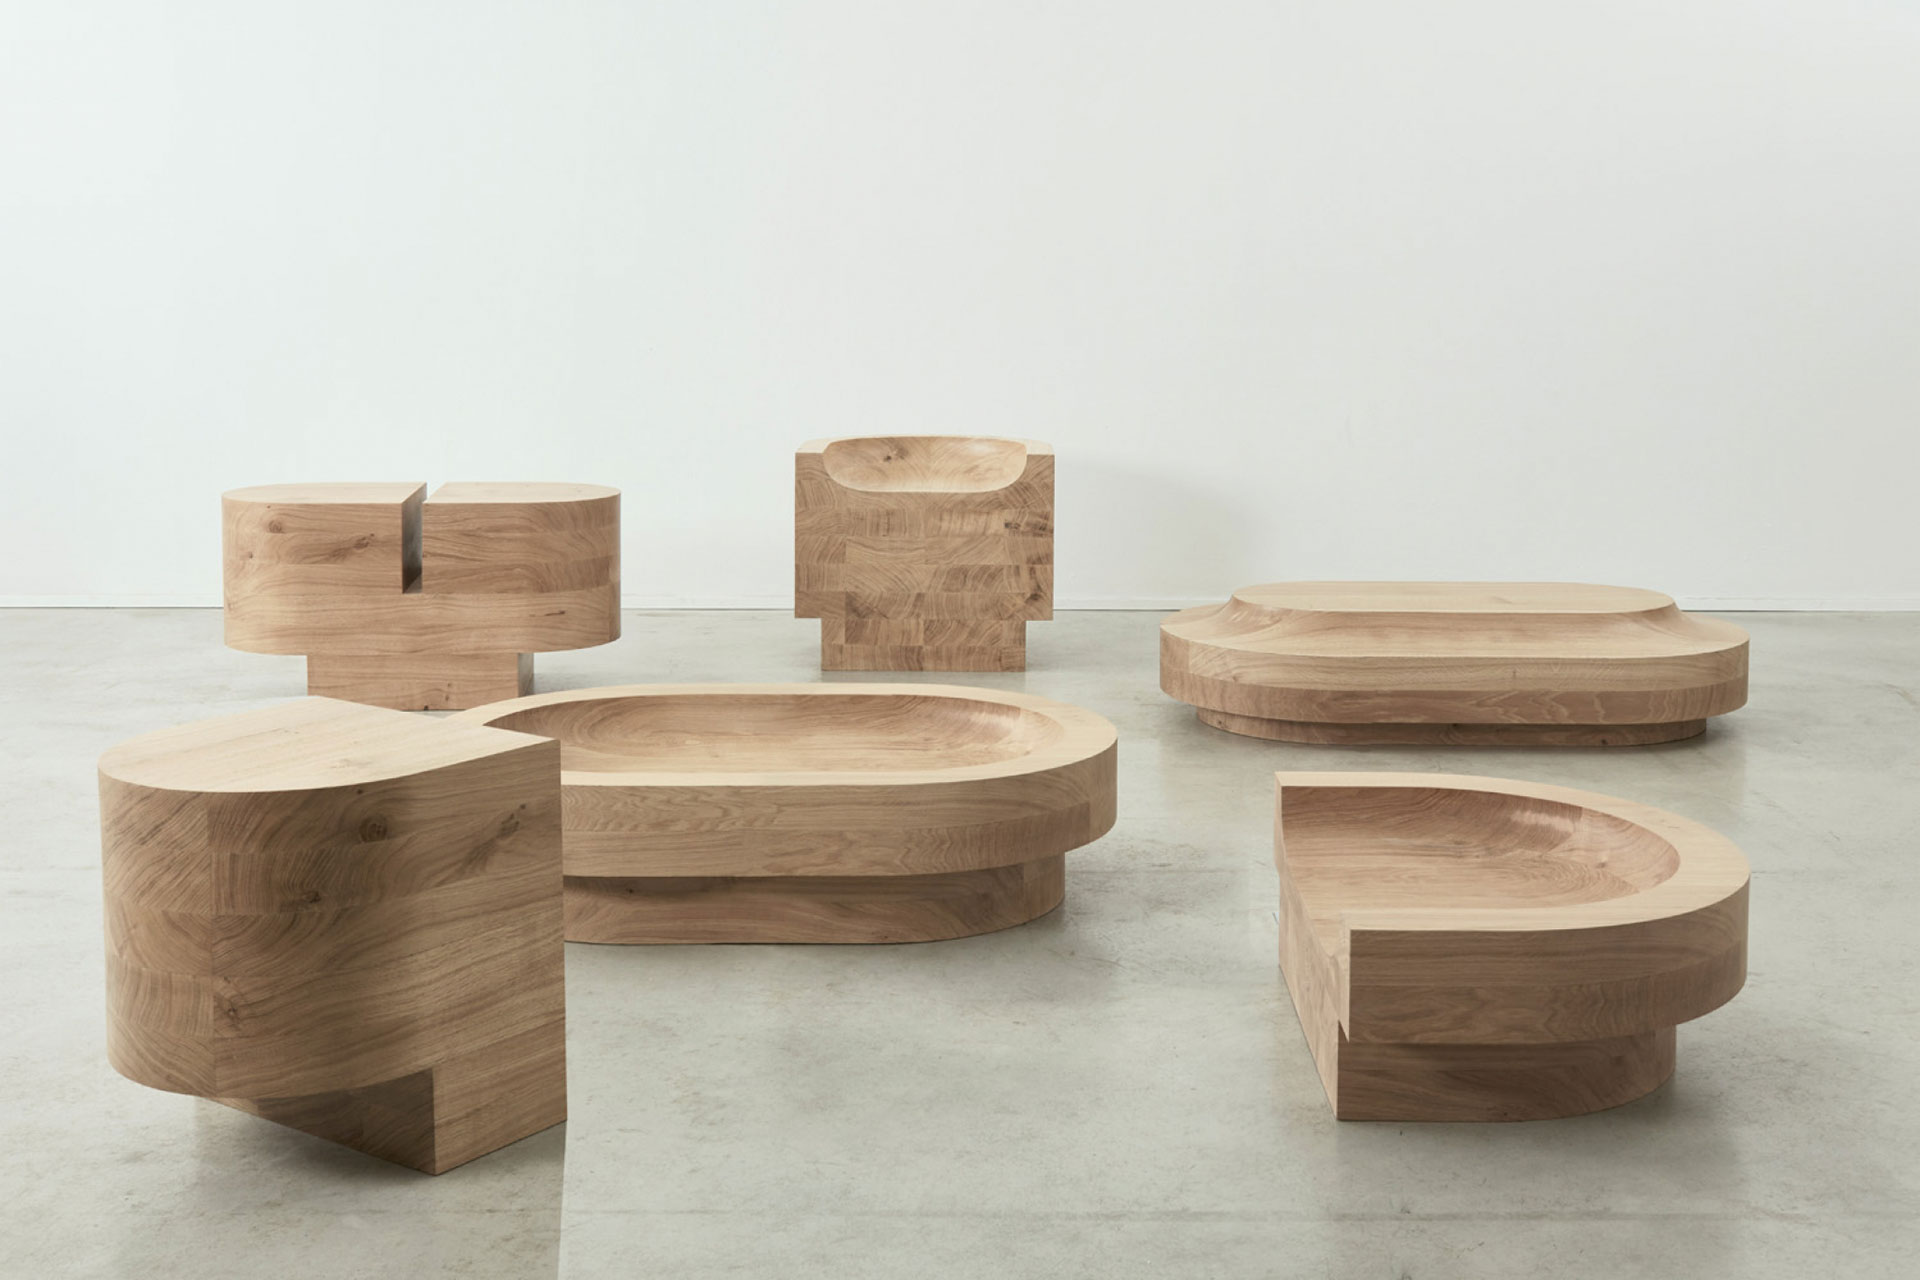 Low collection furniture pieces by Ebba Architects